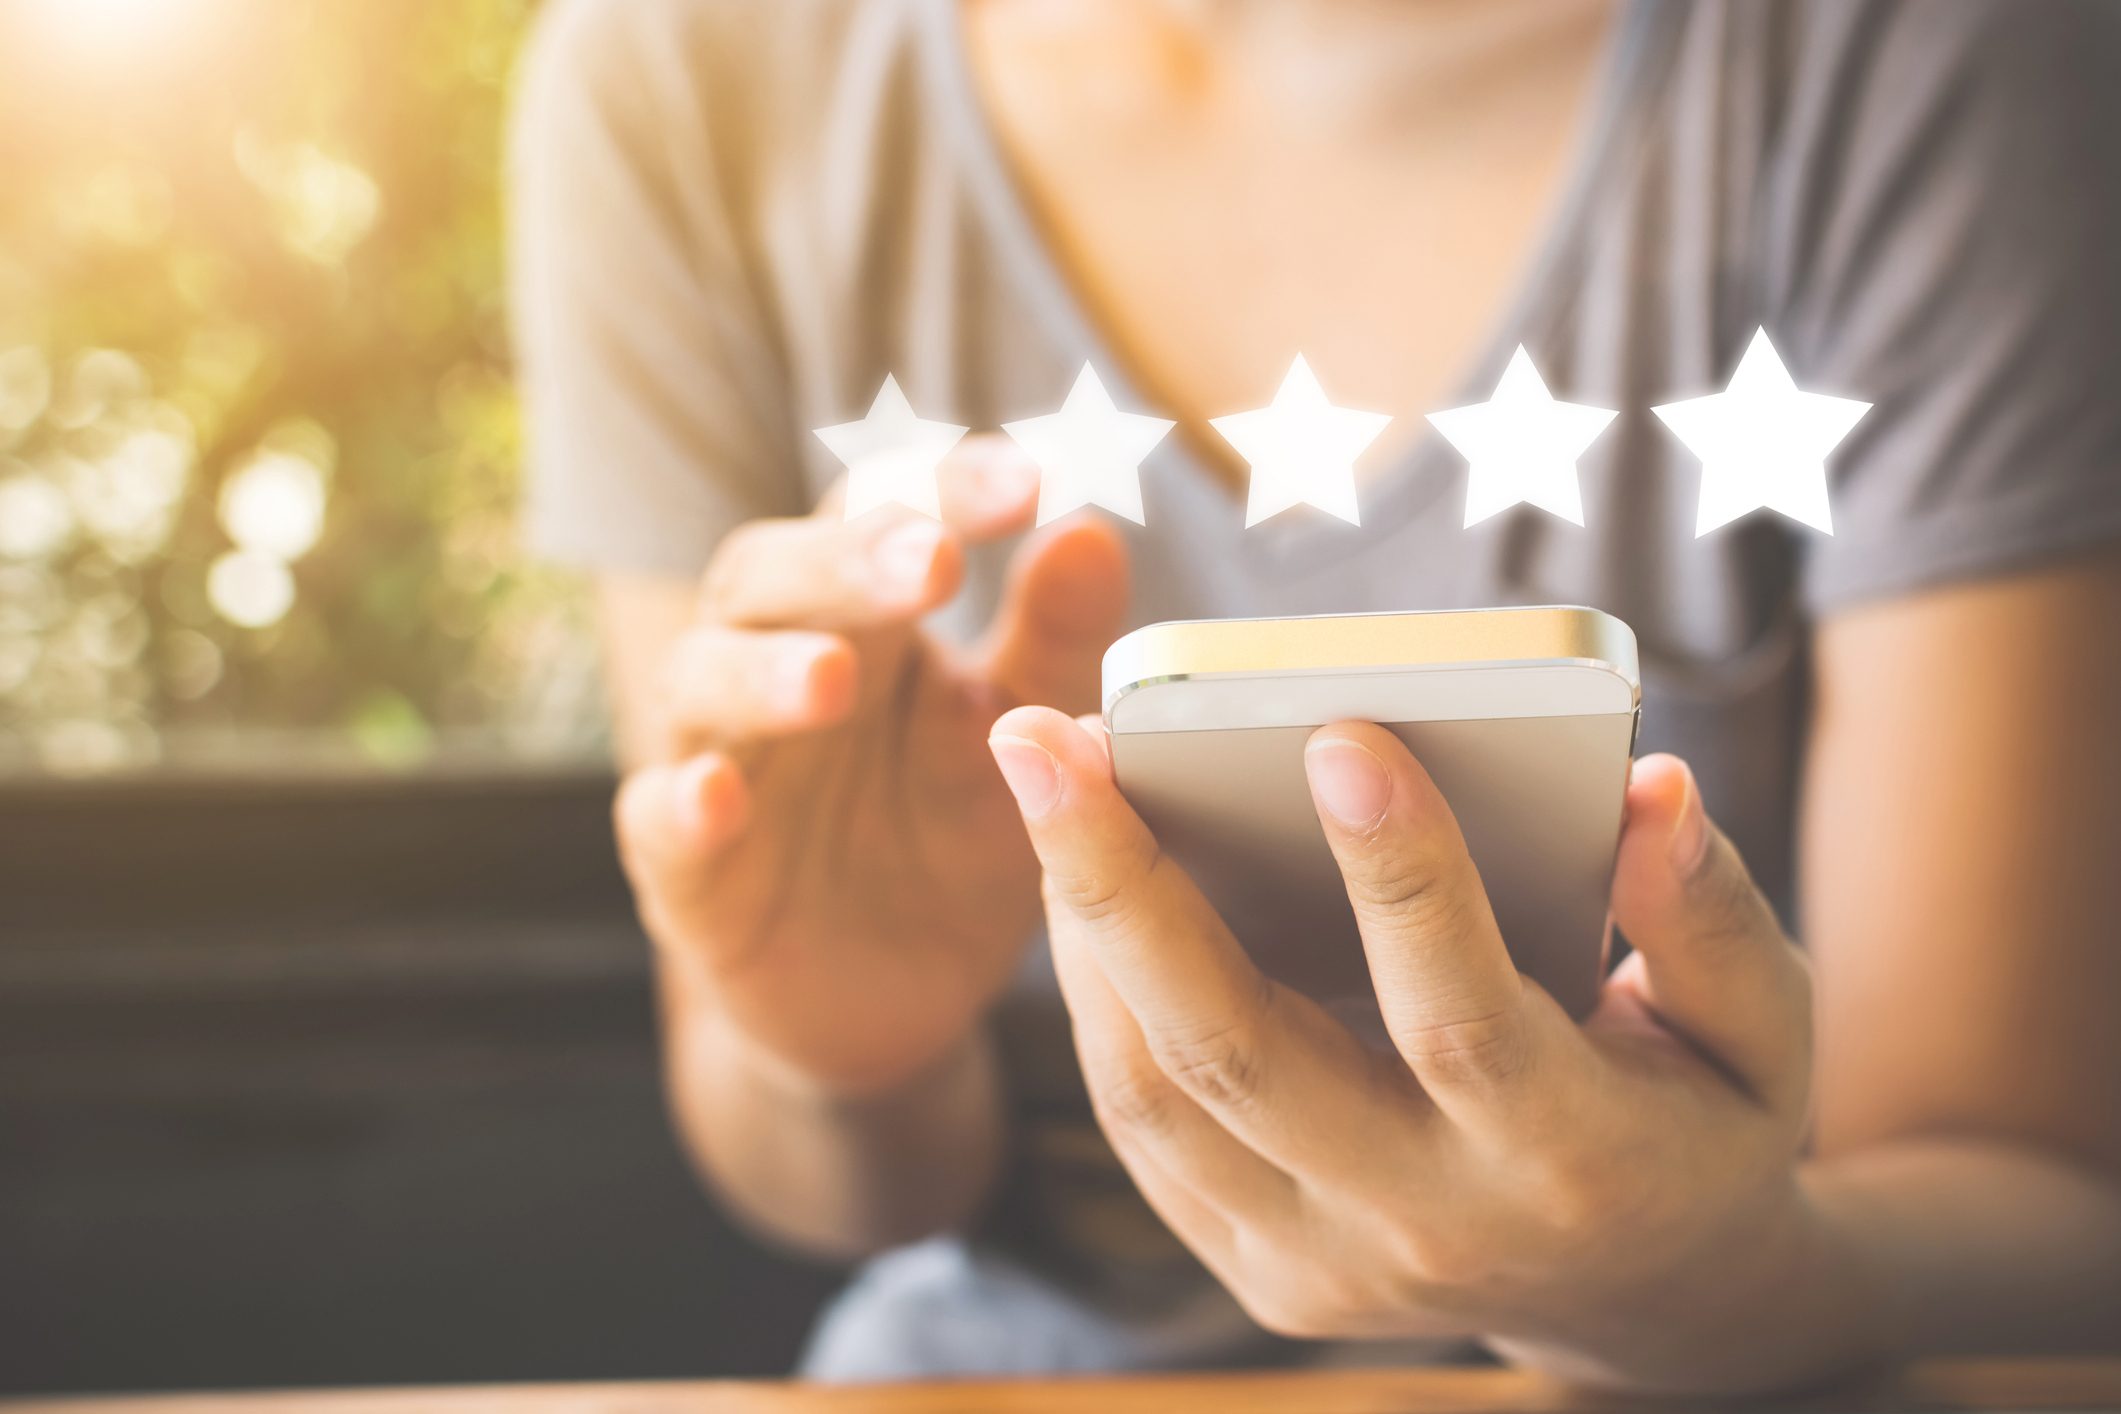 A person in a gray shirt holding a phone with five white stars above the phone